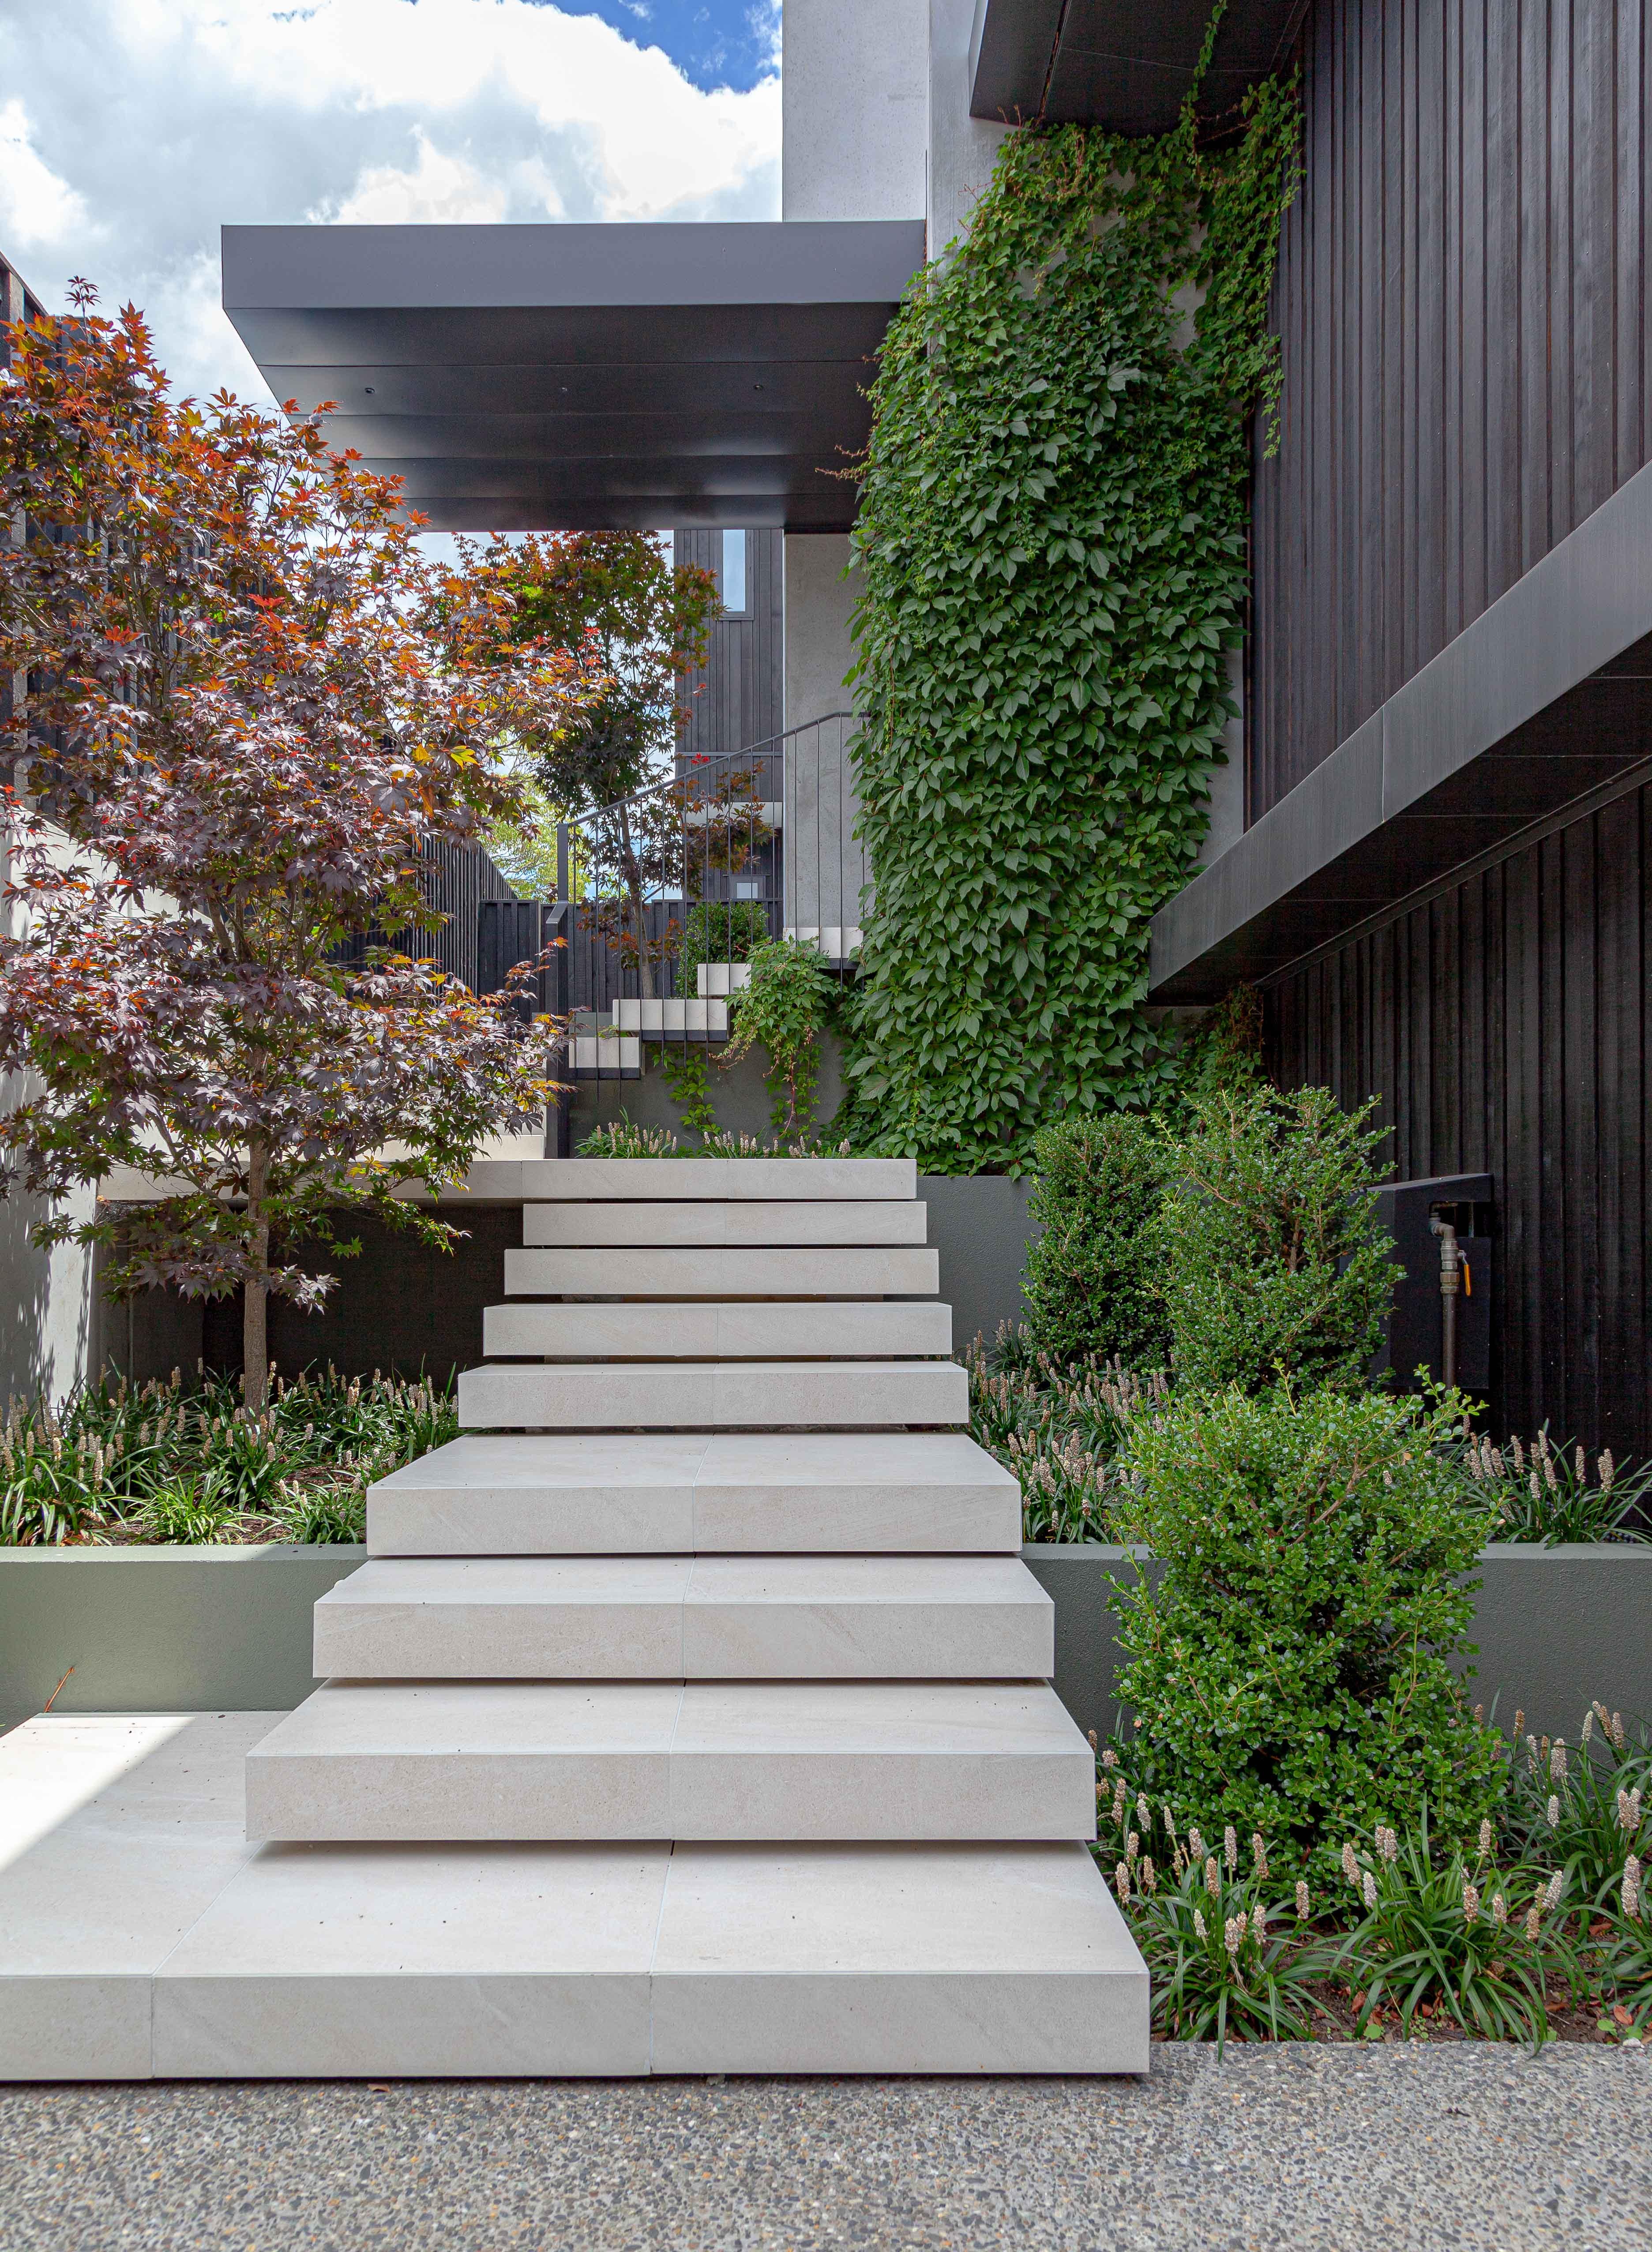 Floating concrete stairs flanked by pared back planting create instant street appeal at the entrance of this Remuera home by Jessop Architects, with landscaping by Jared Lockhard. Image - John Williams.